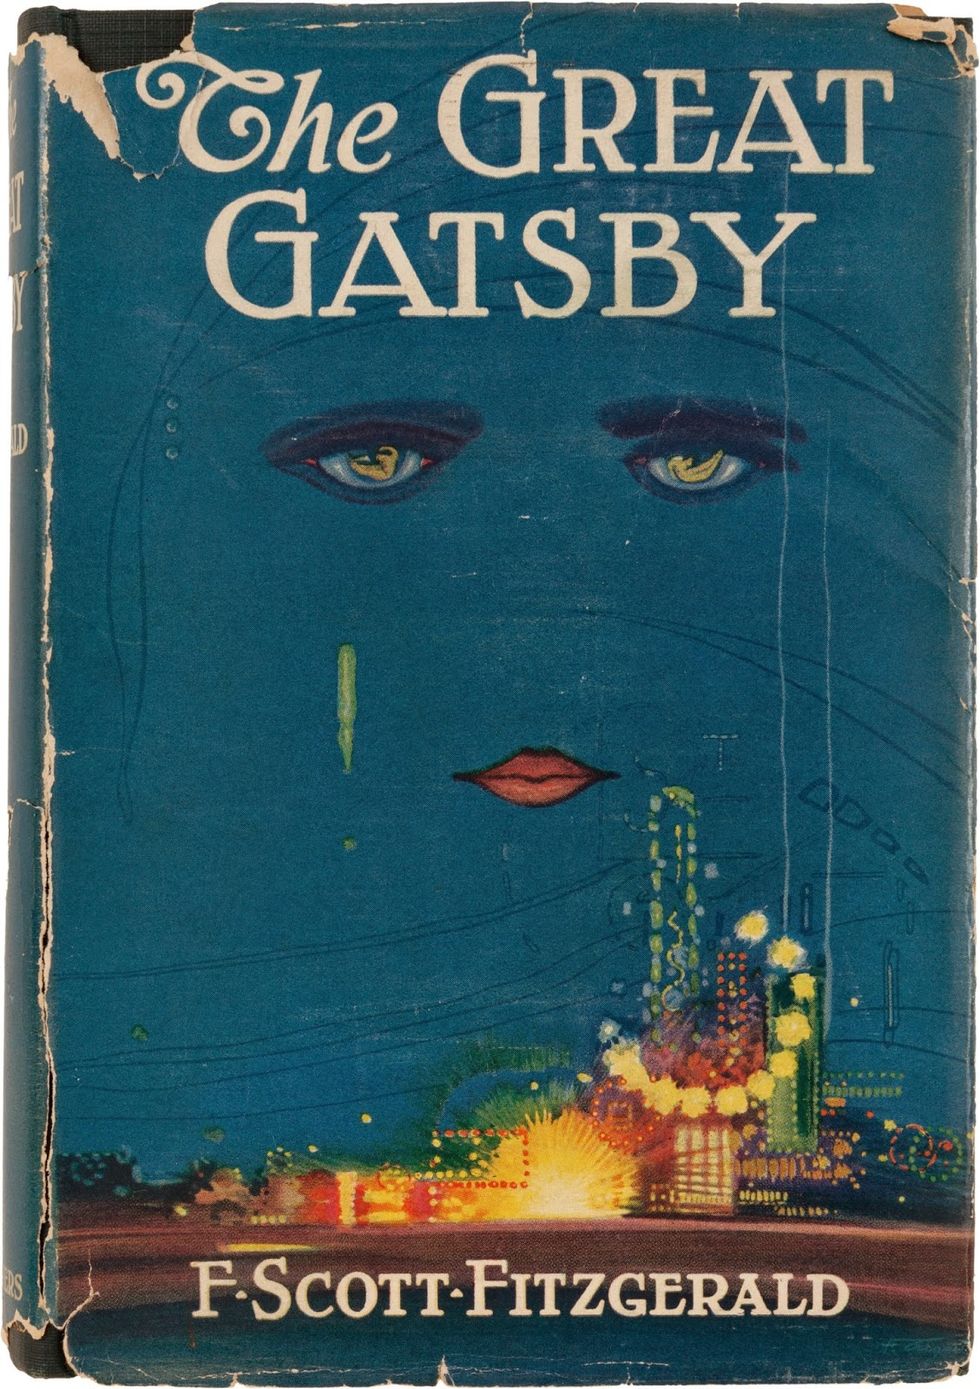 Why The 1920s Were Only Roaring For Jay Gatsby